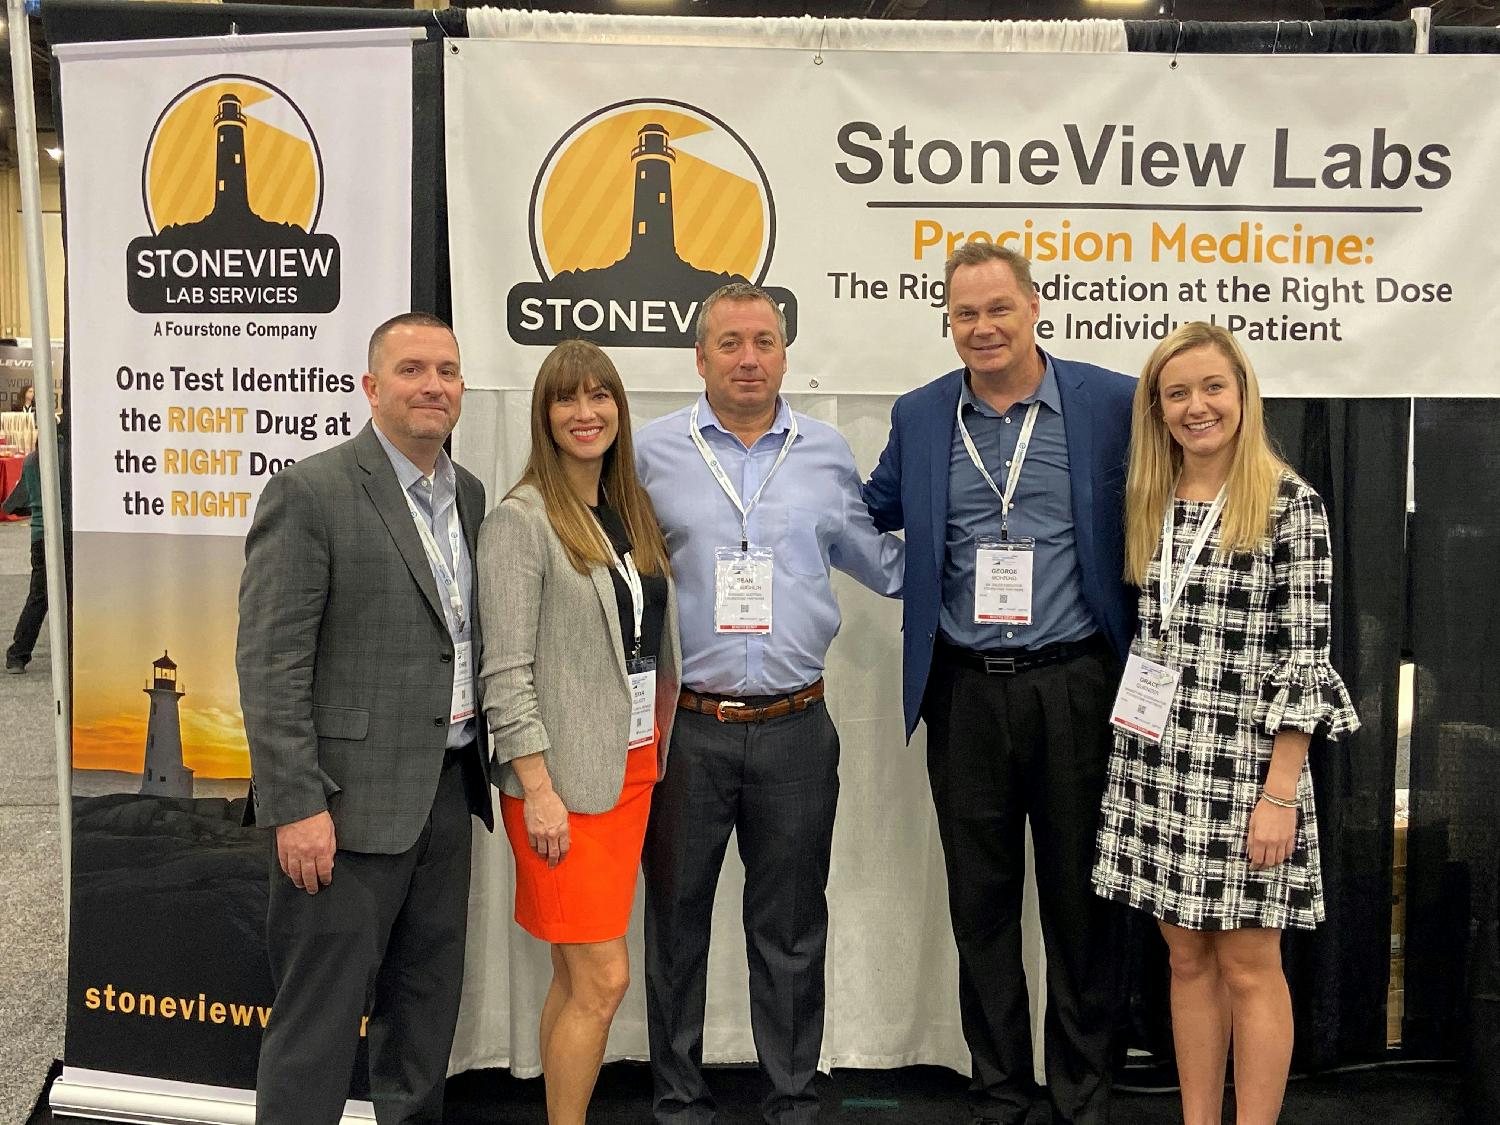 StoneView, a FourStone Company, at the 2019 Workers' Compensation Expo